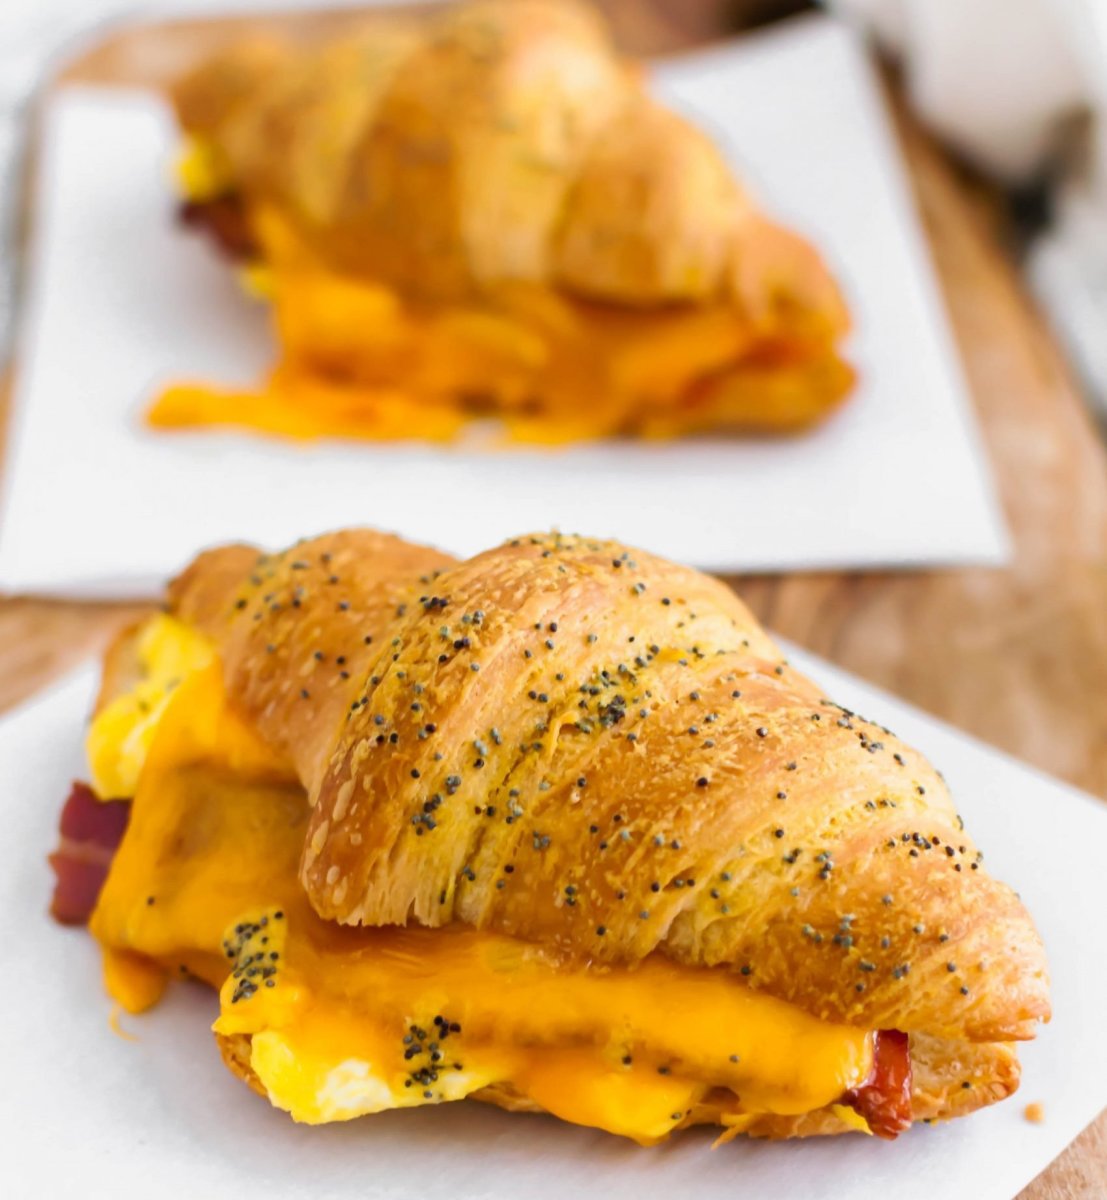 Cheese Croissant Recipes for Breakfast